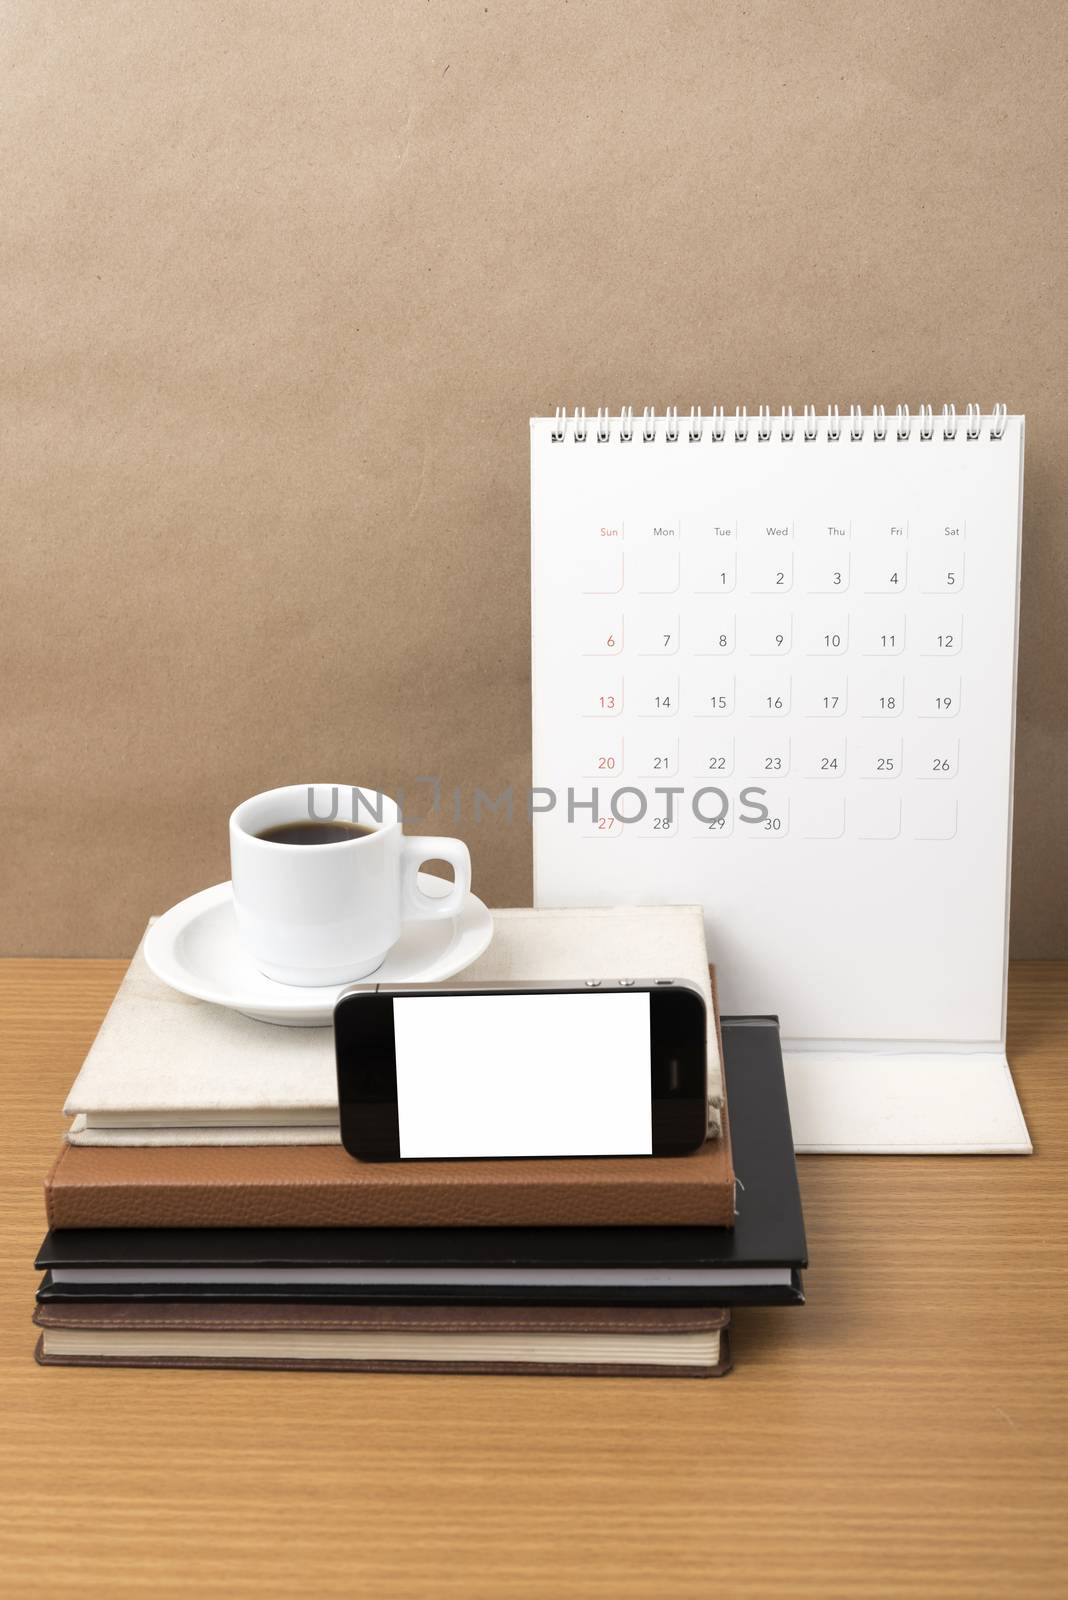 coffee,phone,stack of book and calendar on wood table background